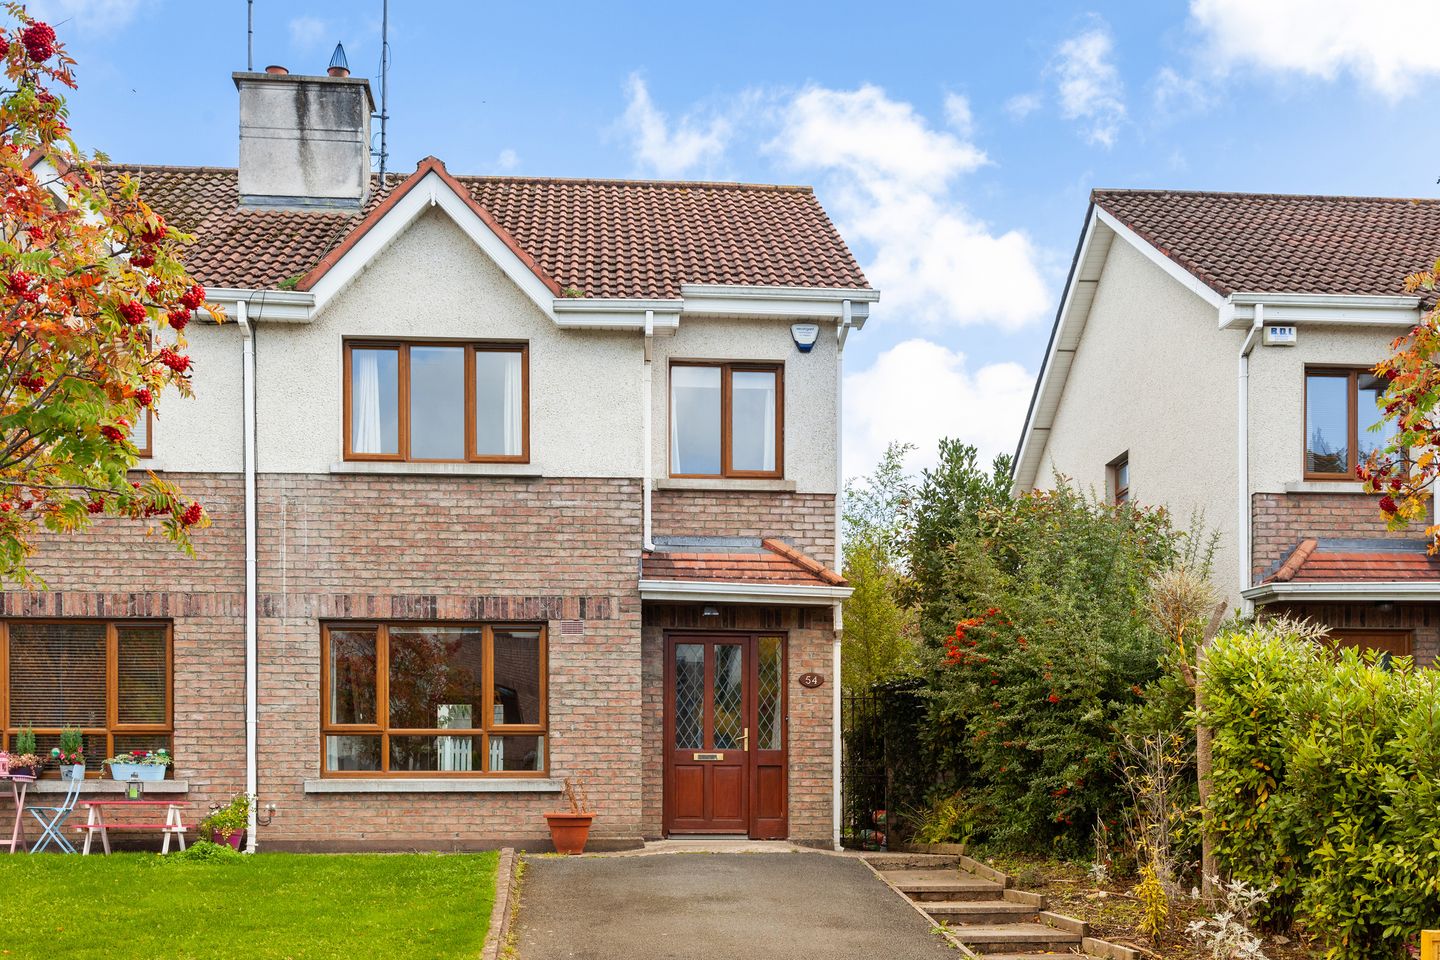 54 Convent Court, Delgany, Co. Wicklow